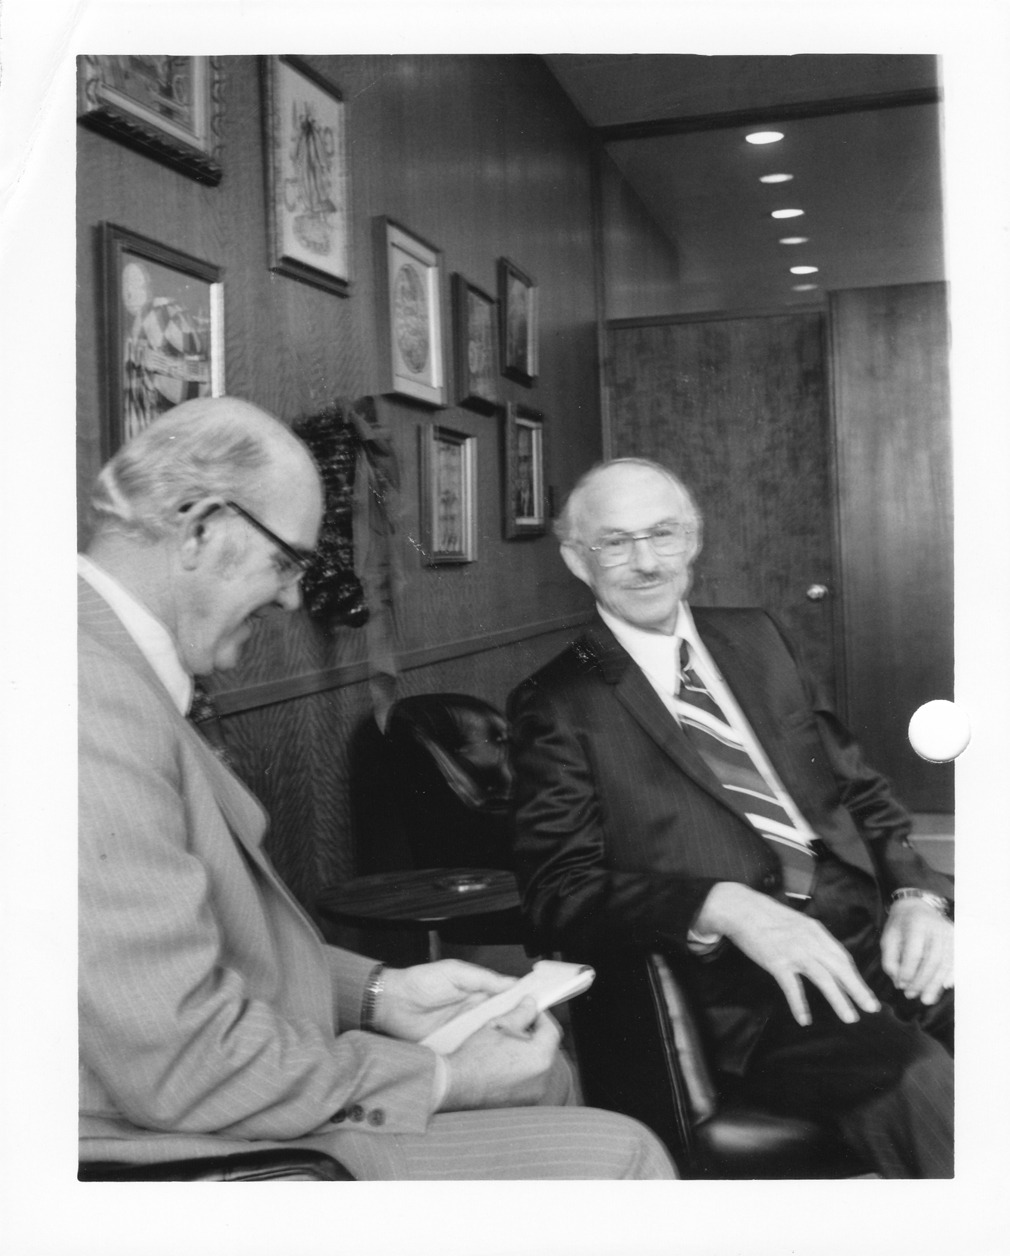 Dr. Clark with interviewer N. Don Macon (MS070 Series III, Box 112, folder 6)